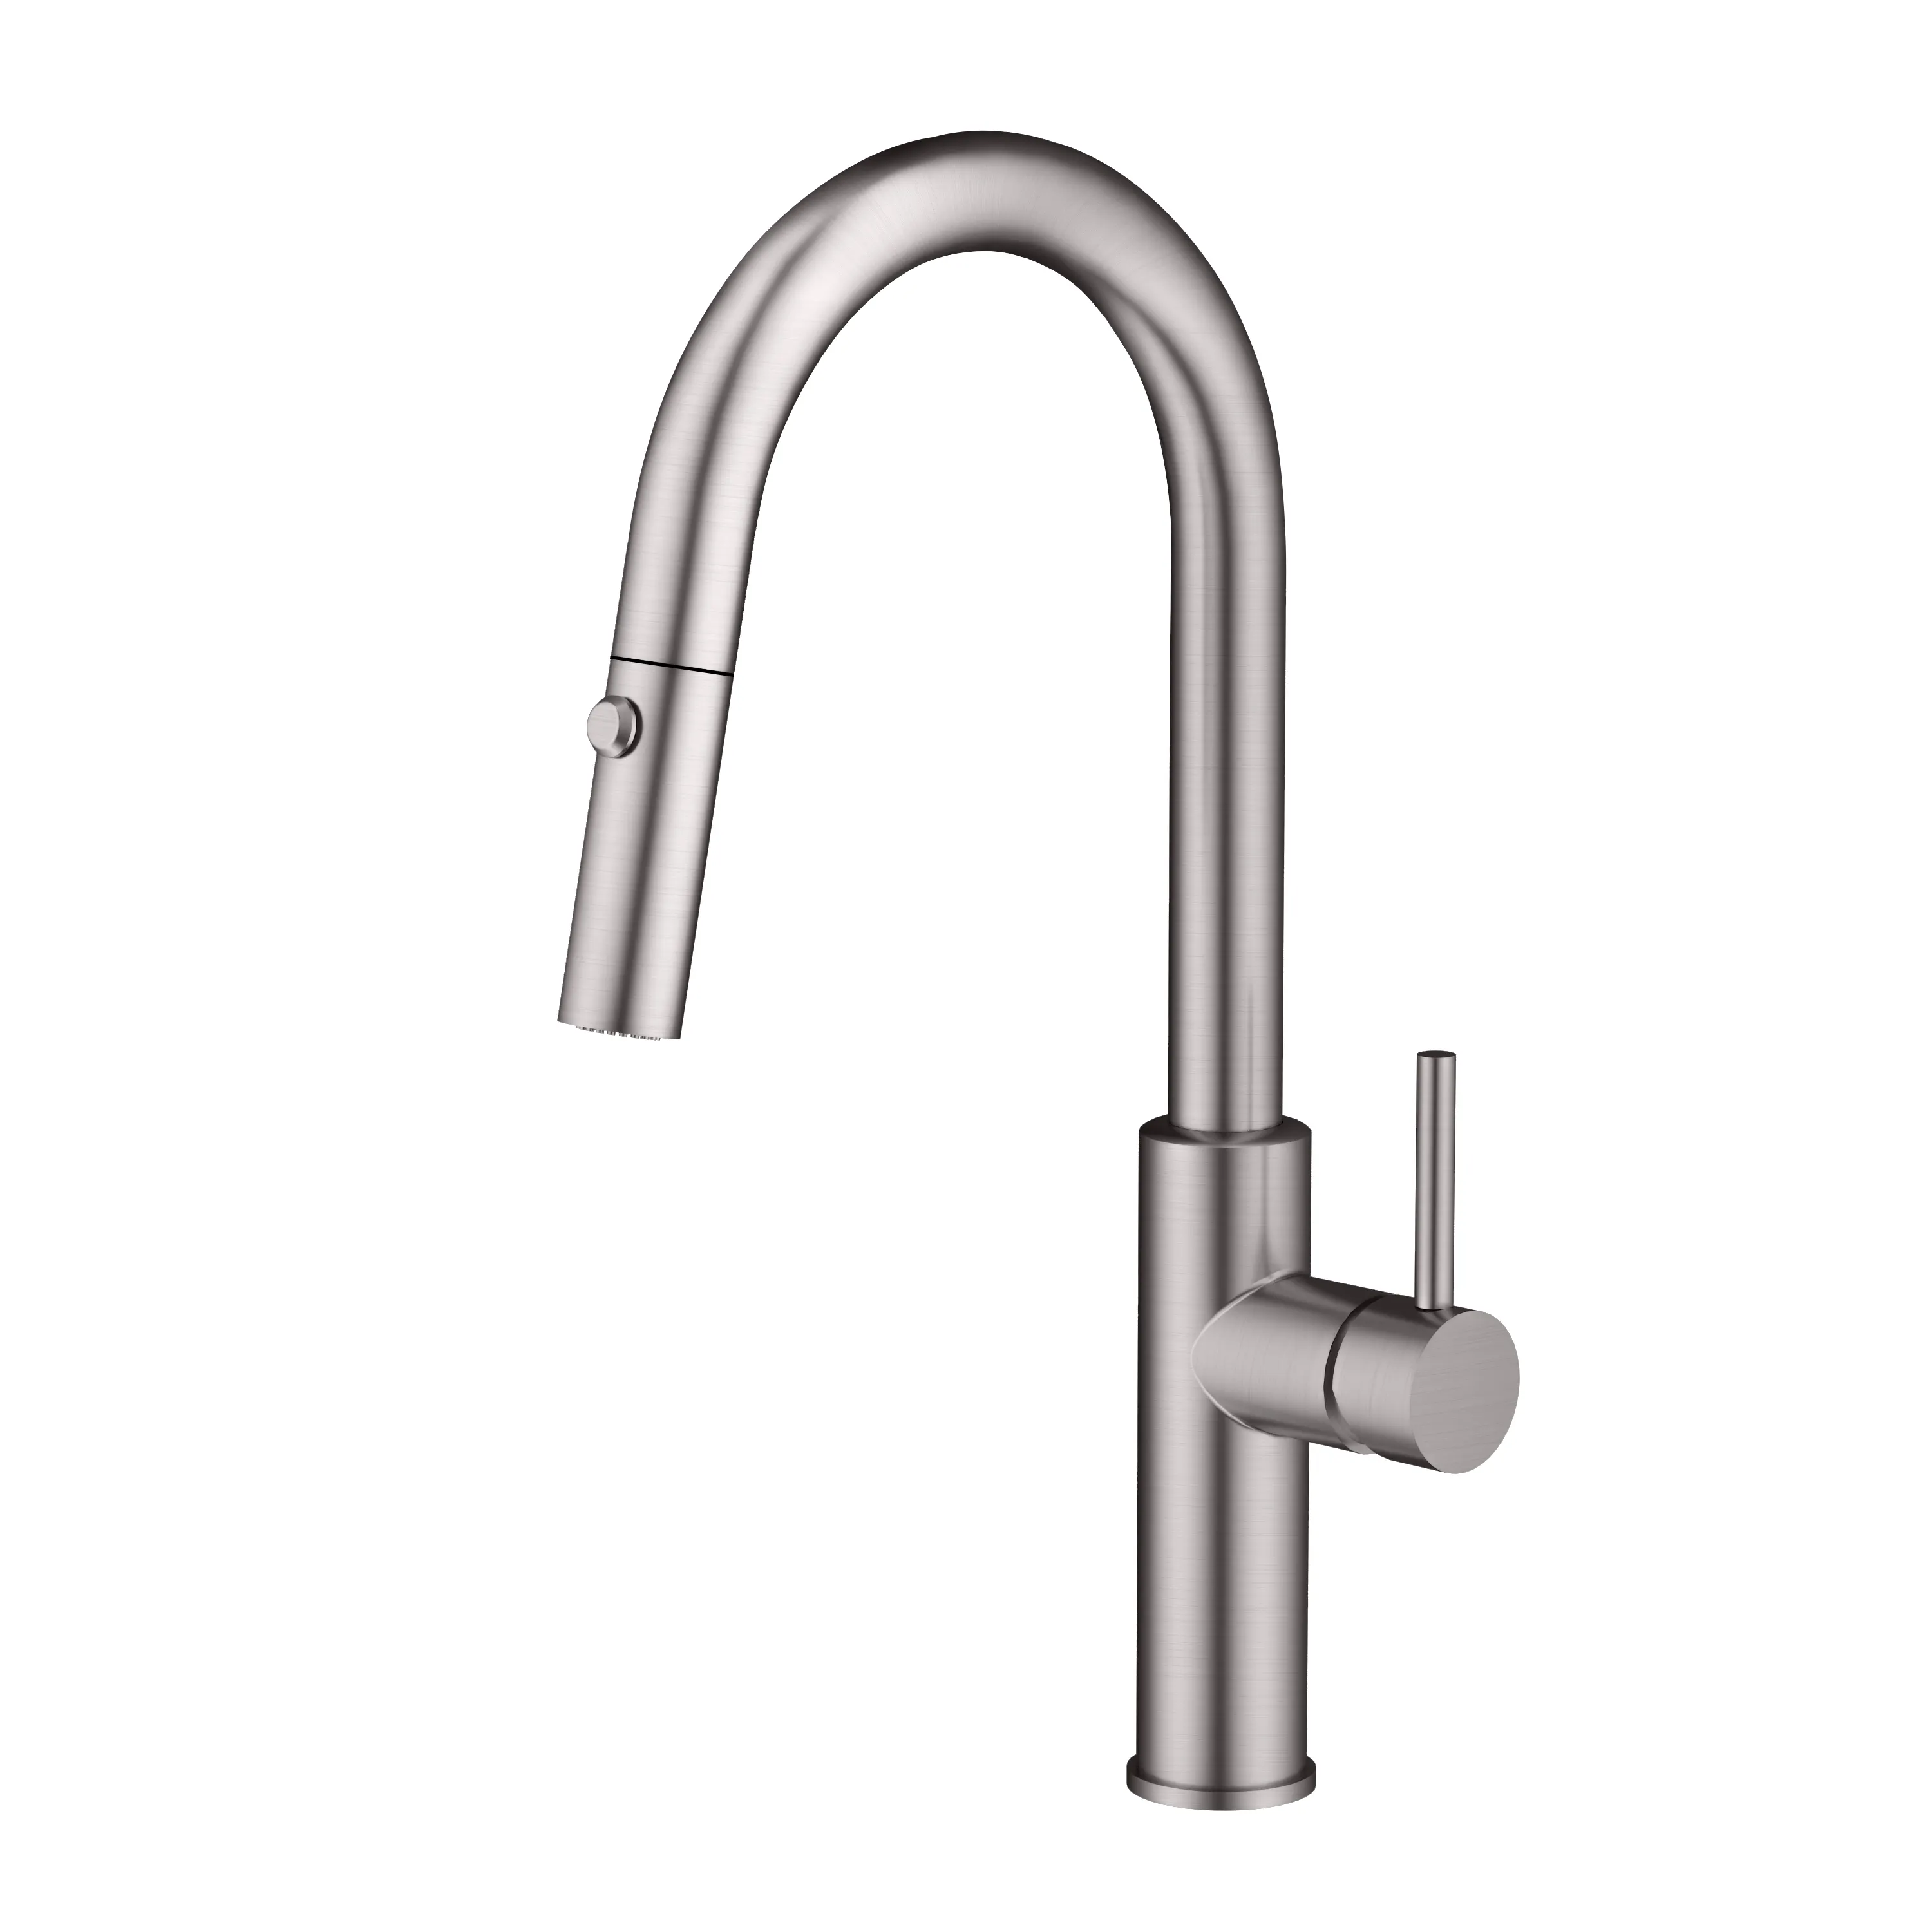 Modern torneira gourmet Flexible Pull Out Faucet Kitchen Copper Hot Cold Water Sink Faucet Pull Out Down Kitchen Taps